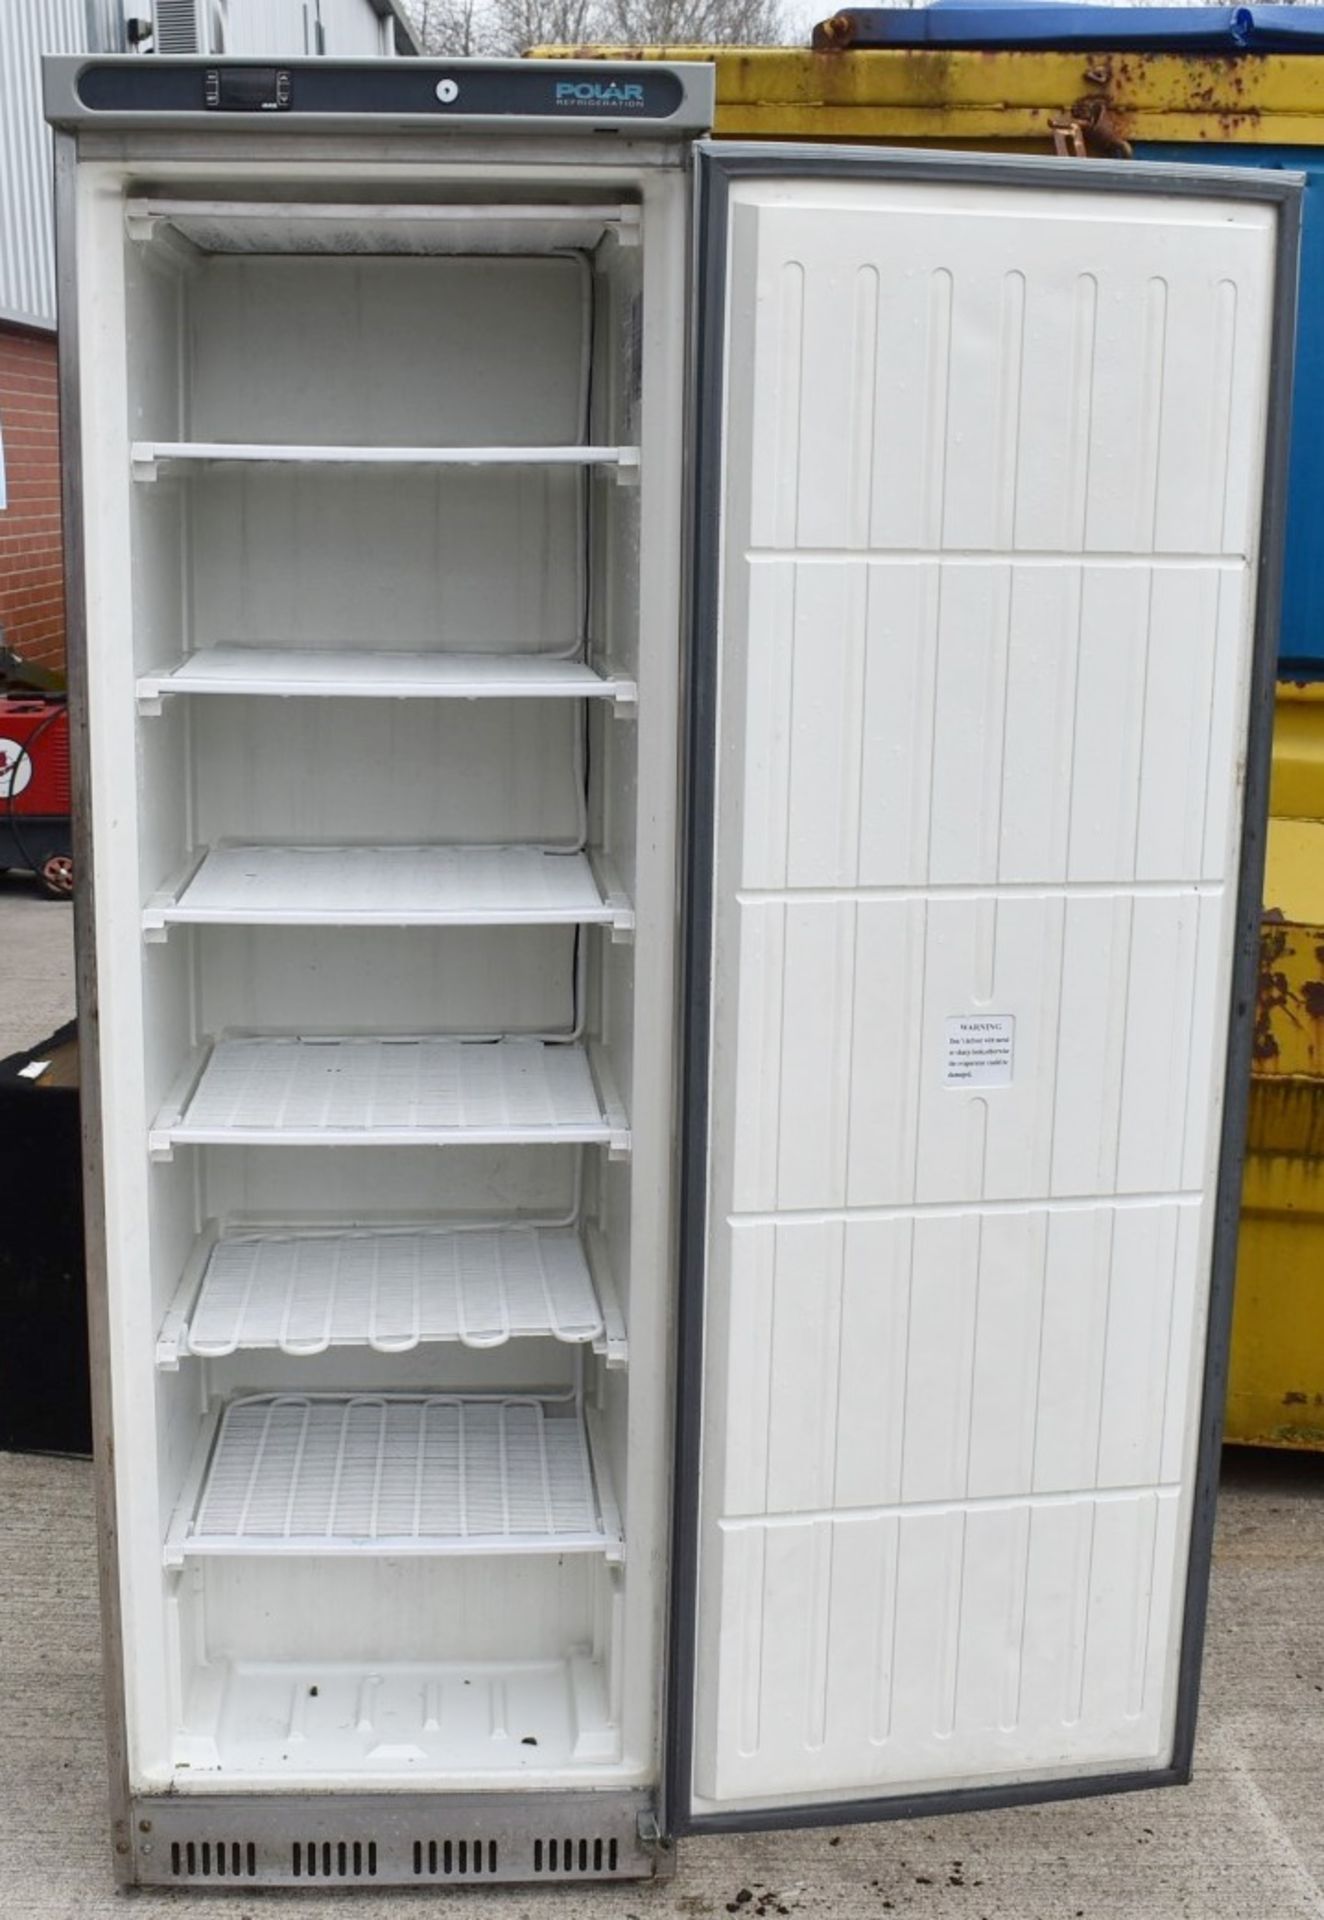 1 x Polar CD083 Upright Freezer With Stainless Steel Exterior - Dimensions: H185 x W60 x D60 cms